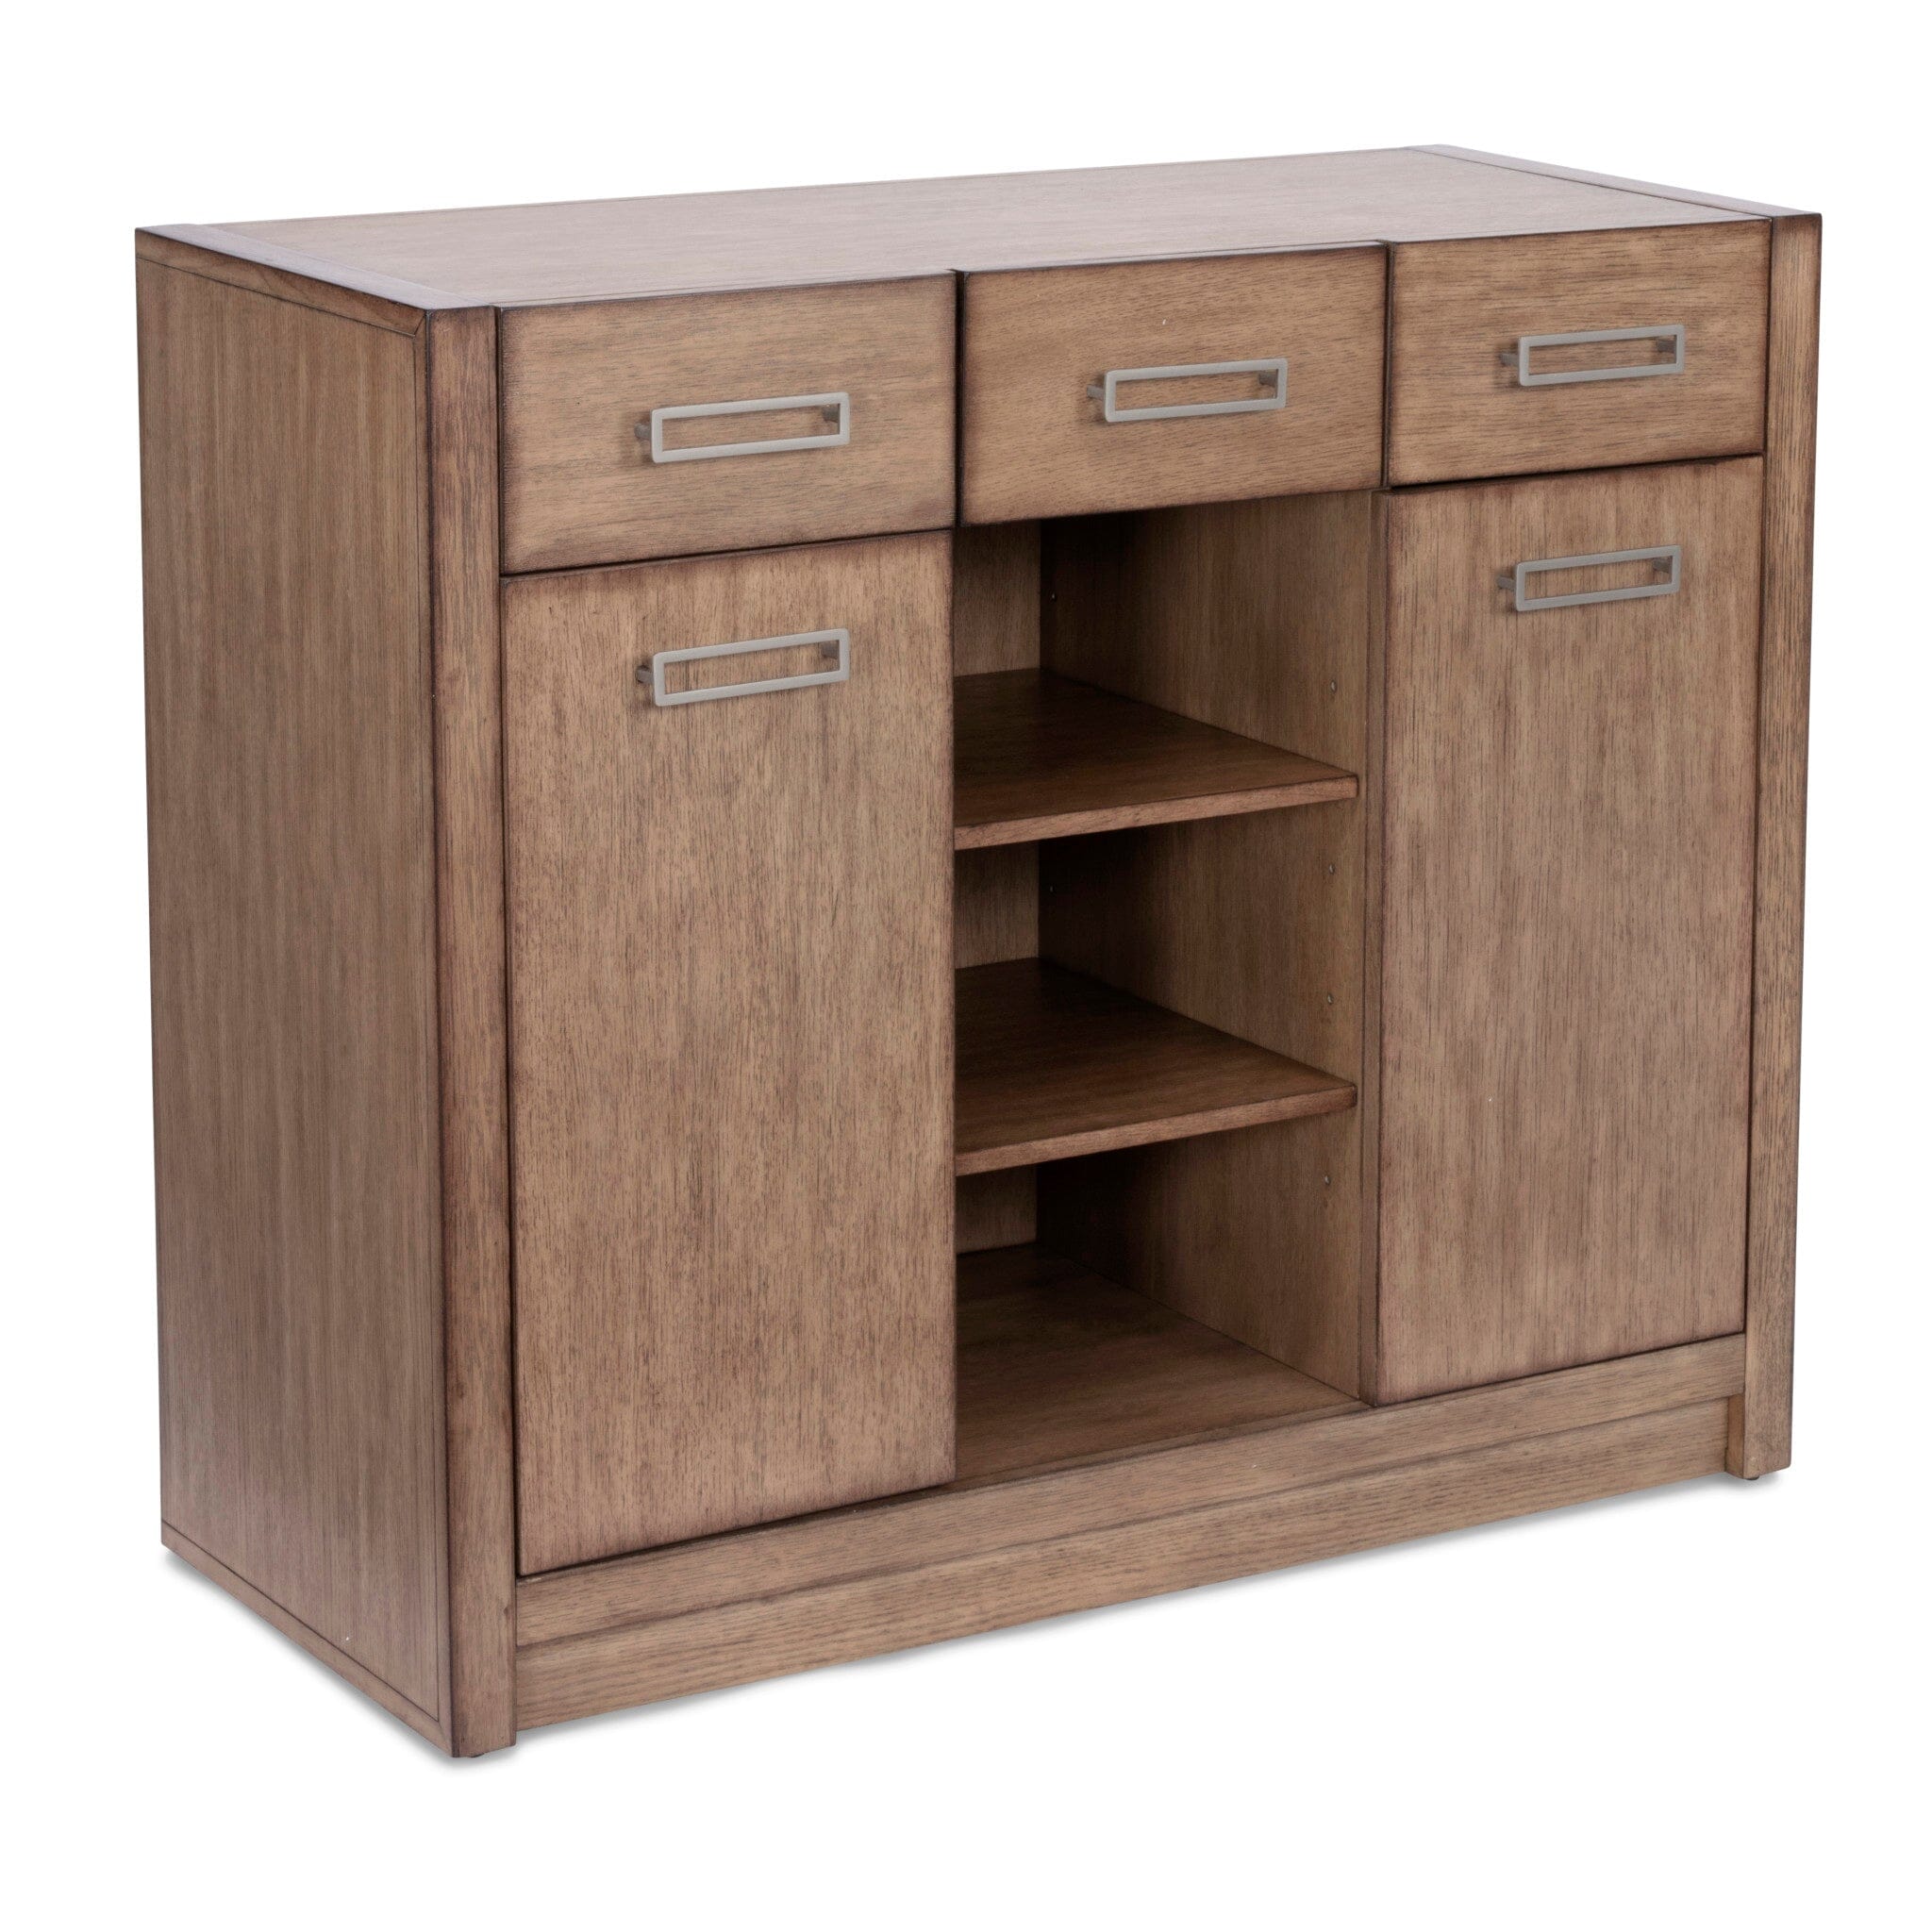 Modern & Contemporary Buffet By Big Sur Dining Room Furniture Big Sur